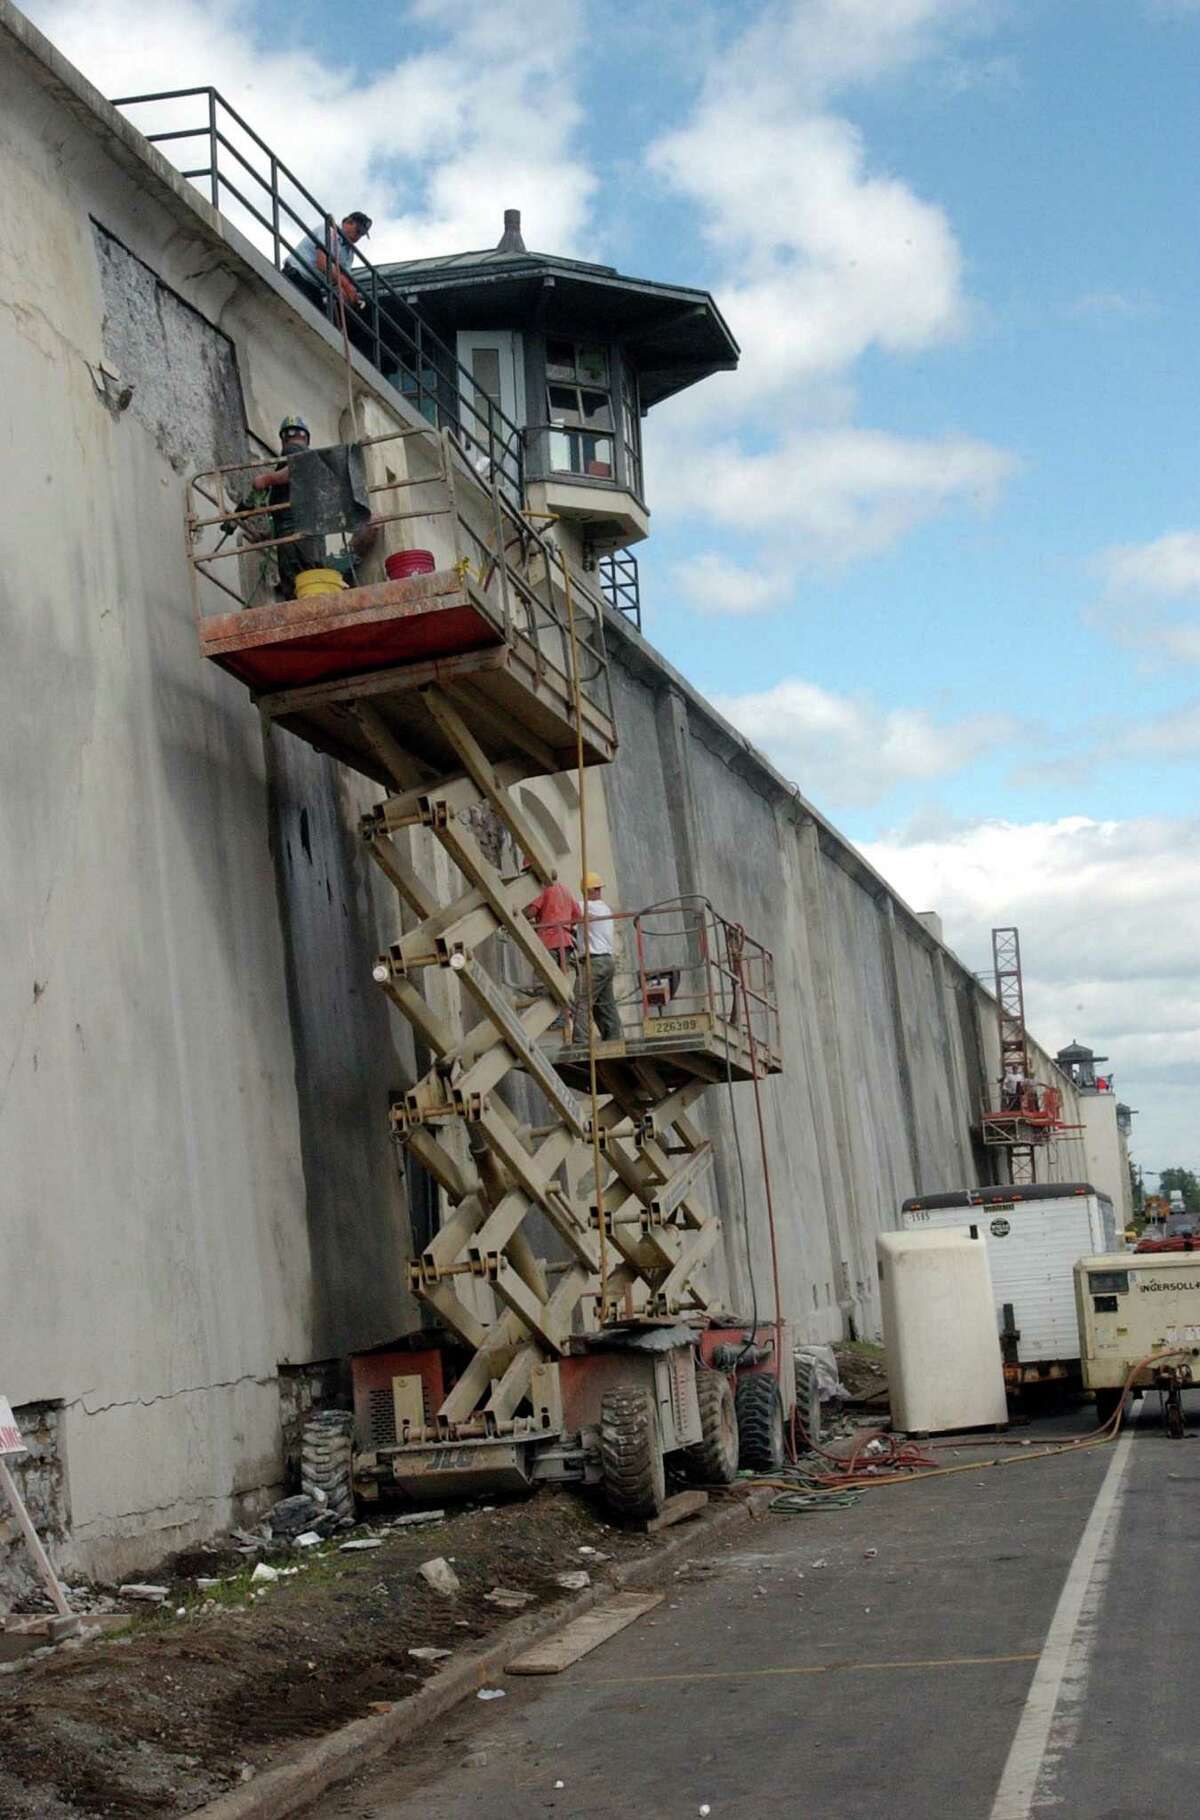 Workers repair a section of Clinton Correctional Facility's historic wall along Cook Street Sunday, Nov. 14, 2004, in Dannemora, N.Y. After four decades of harsh weather rotting the wooden wall and complaints from residents, New York state appropriated $20,000 to replace it with a more imposing barrier made from stones quarried in Dannemora and Lyon Mountain. (AP Photo/Press Republican, Michael Betts)